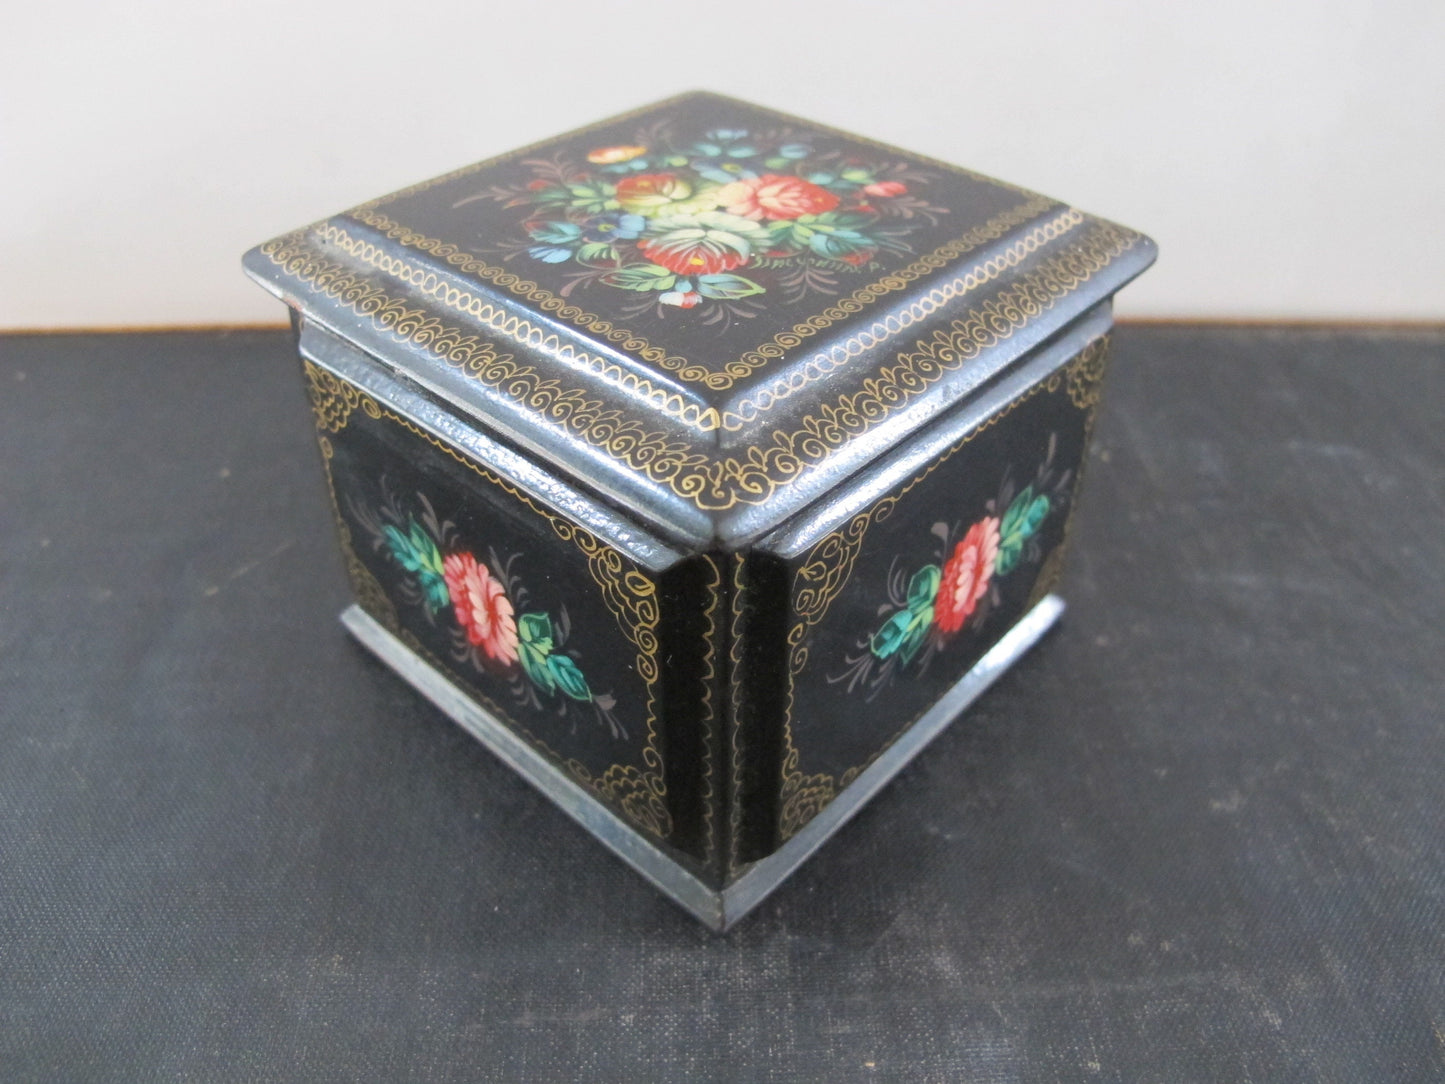 Russian Lacquer Box Signed and Dated 1992 1990s Flowers Floral